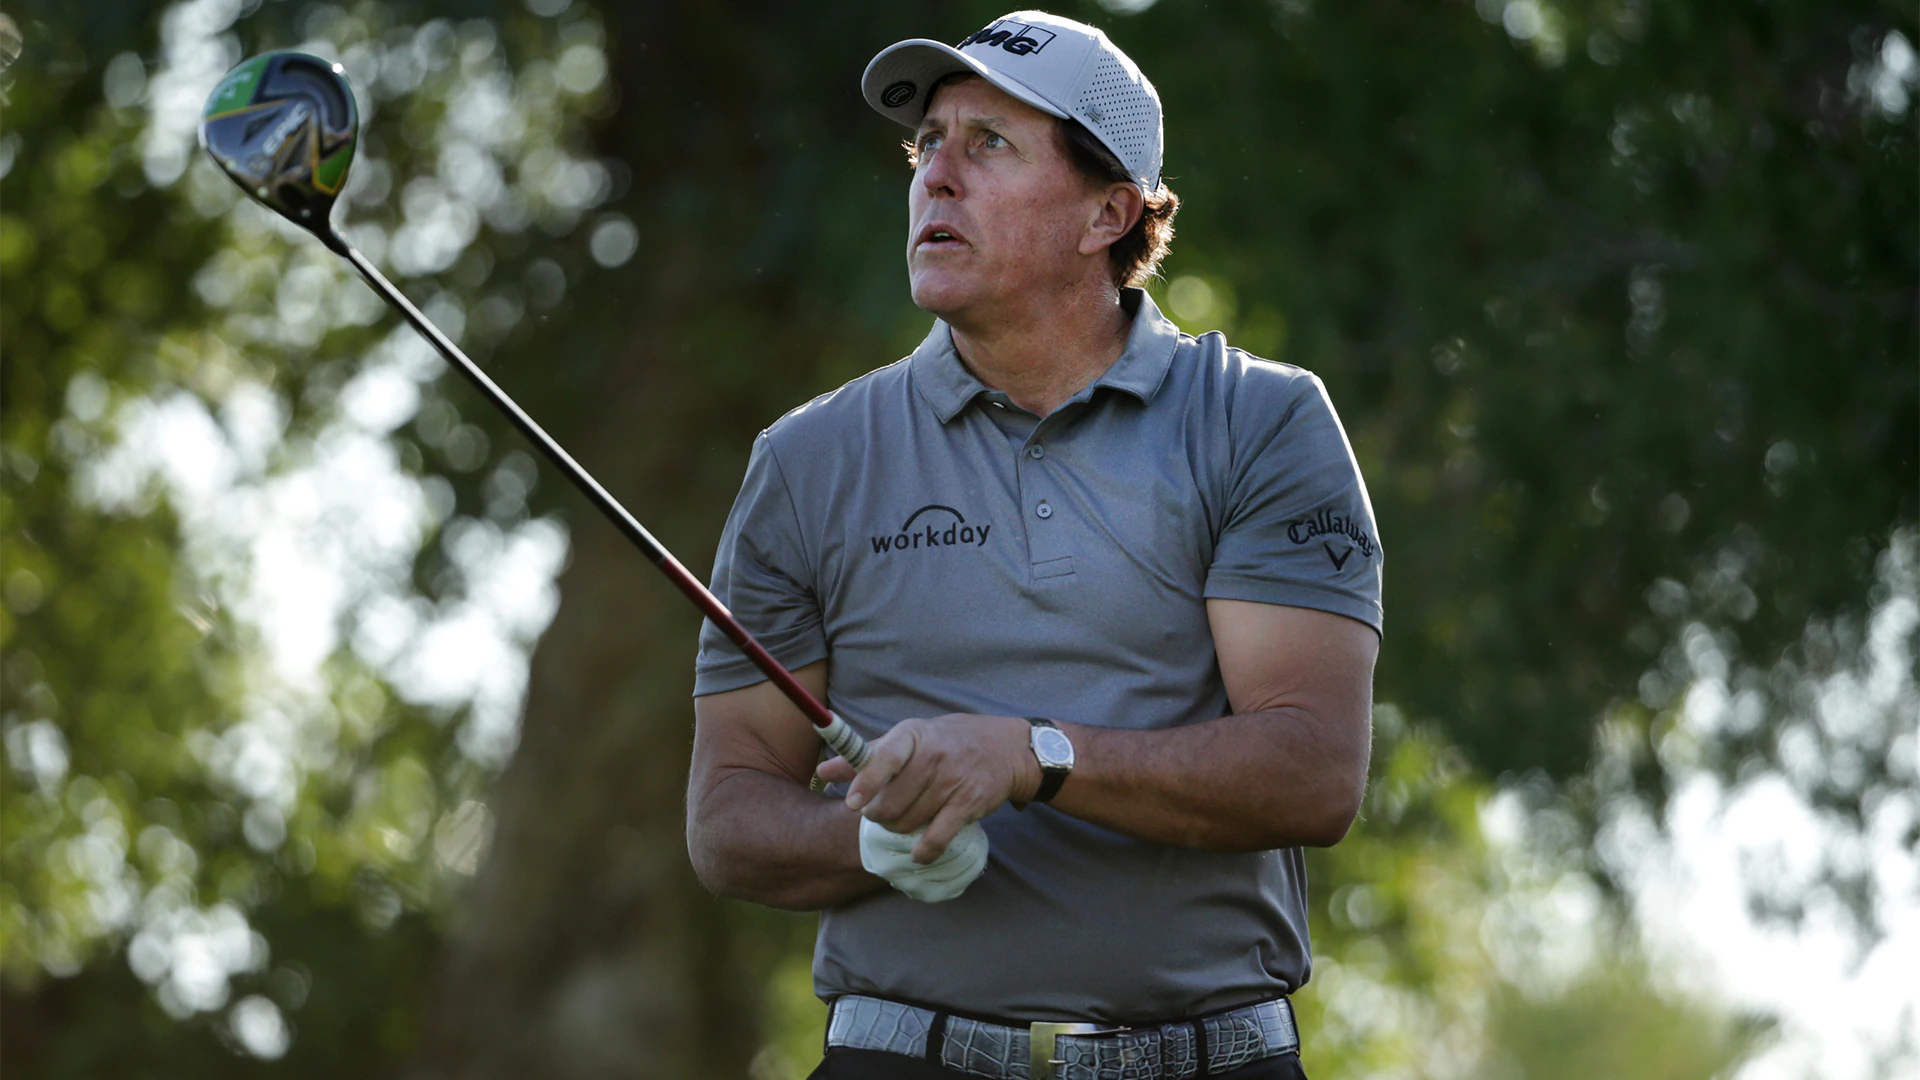 A new year begins, Phil Mickelson still PGA Tour first, but hears Champions call